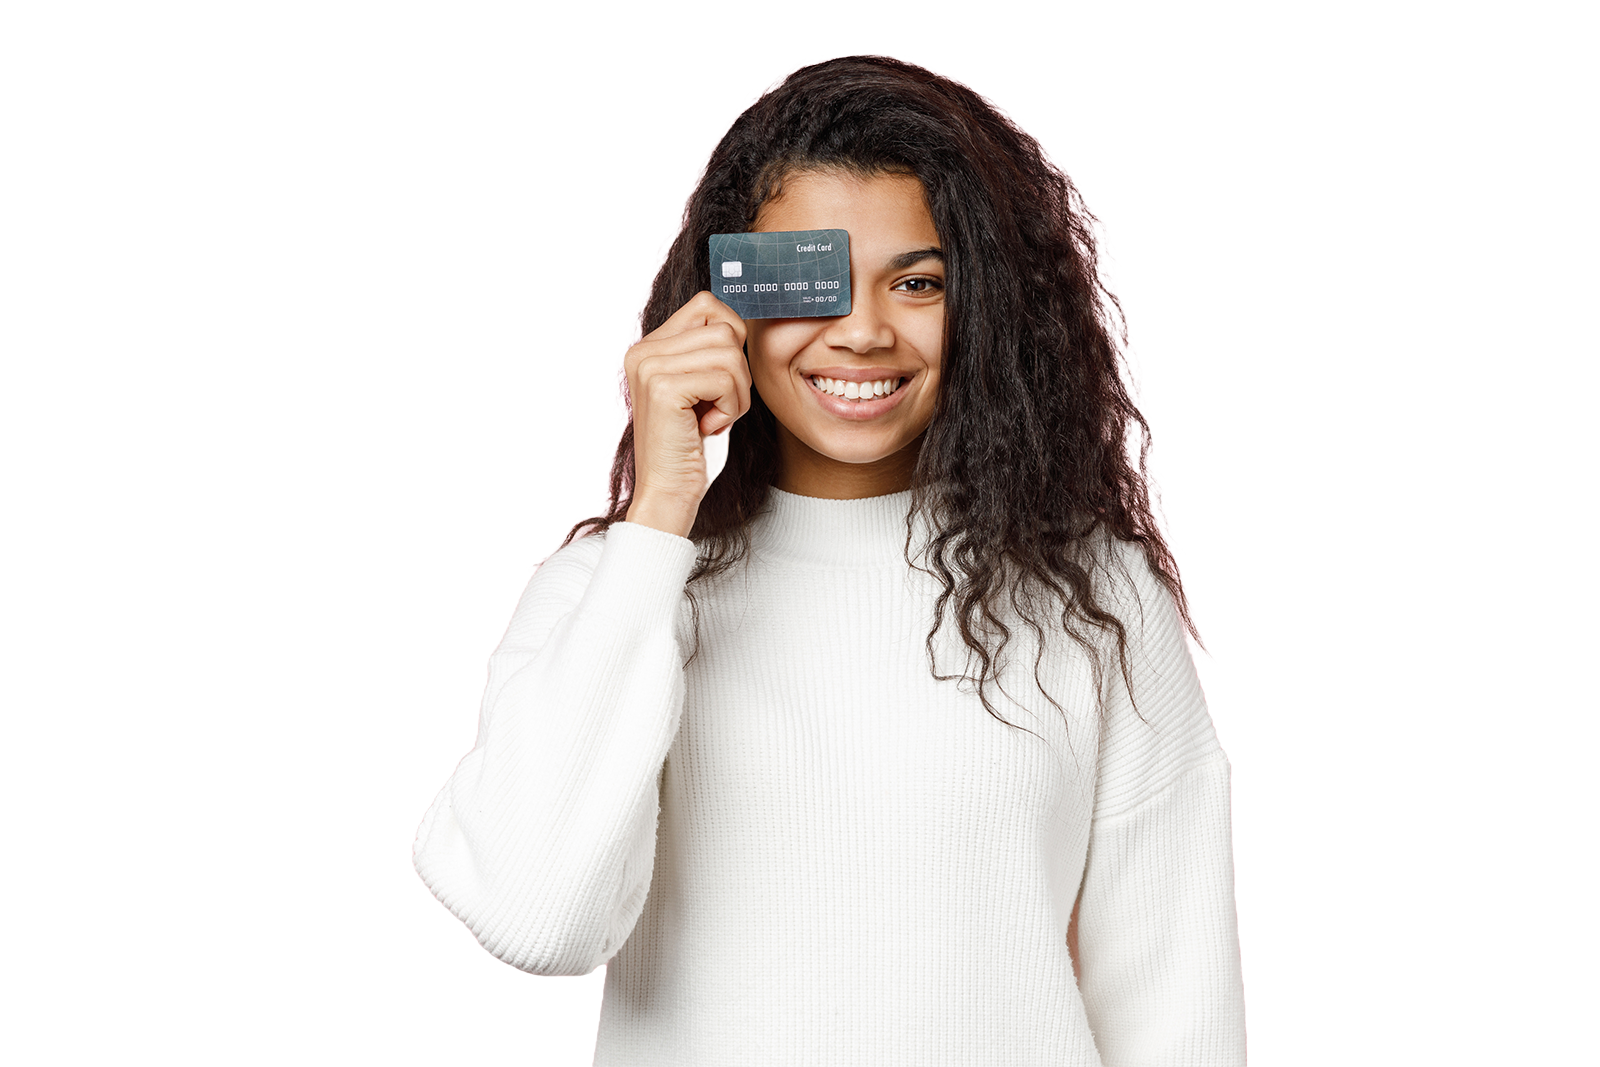 Girl smiling holding up a credit card to her eye